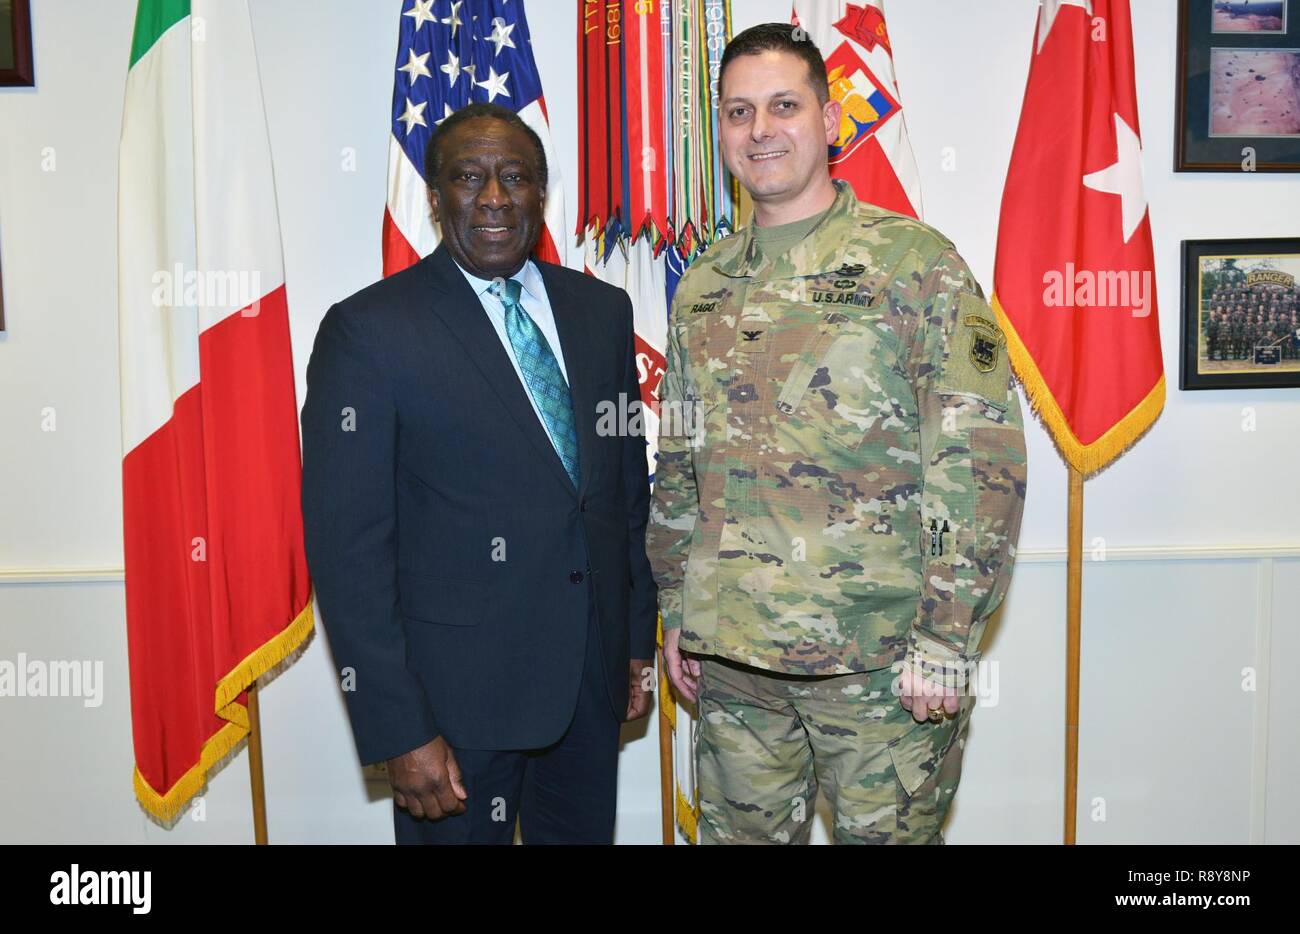 Col. Louis B. Rago (right), chief of staff for U.S. Army Africa, and Mr. Ray B. Shepherd, Director Defense Media Activity; pose for a photograph in the USARAF commander's office during a recent visit to Caserma Ederle, Vicenza, Italy Mar. 9, 2017. Stock Photo